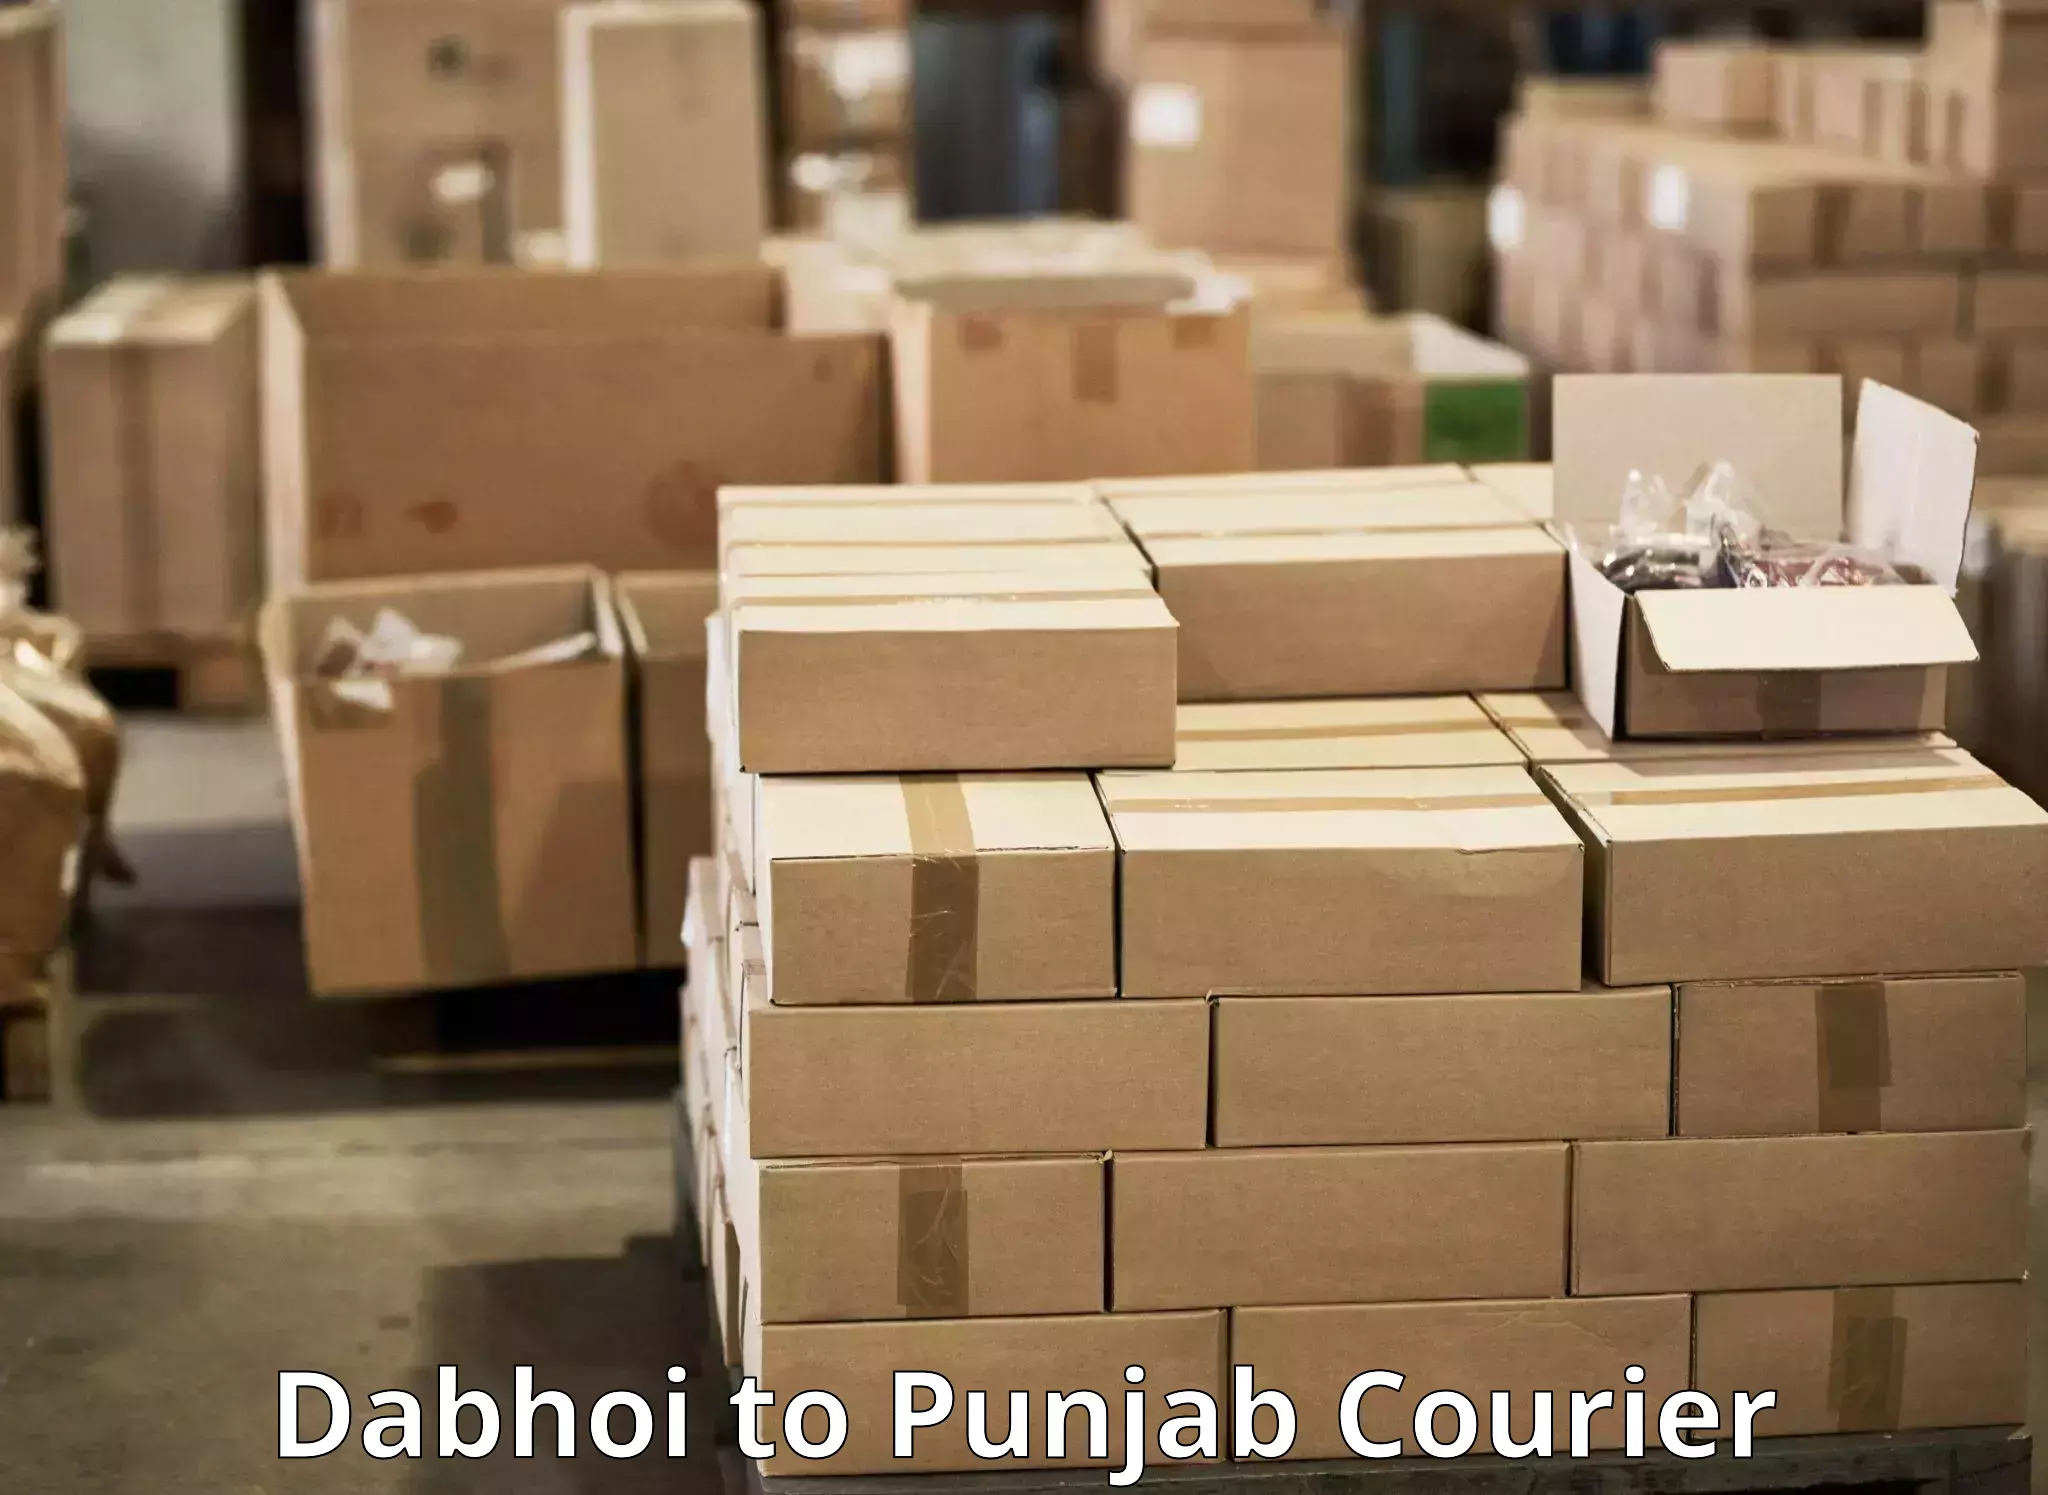 End-to-end delivery Dabhoi to Amritsar